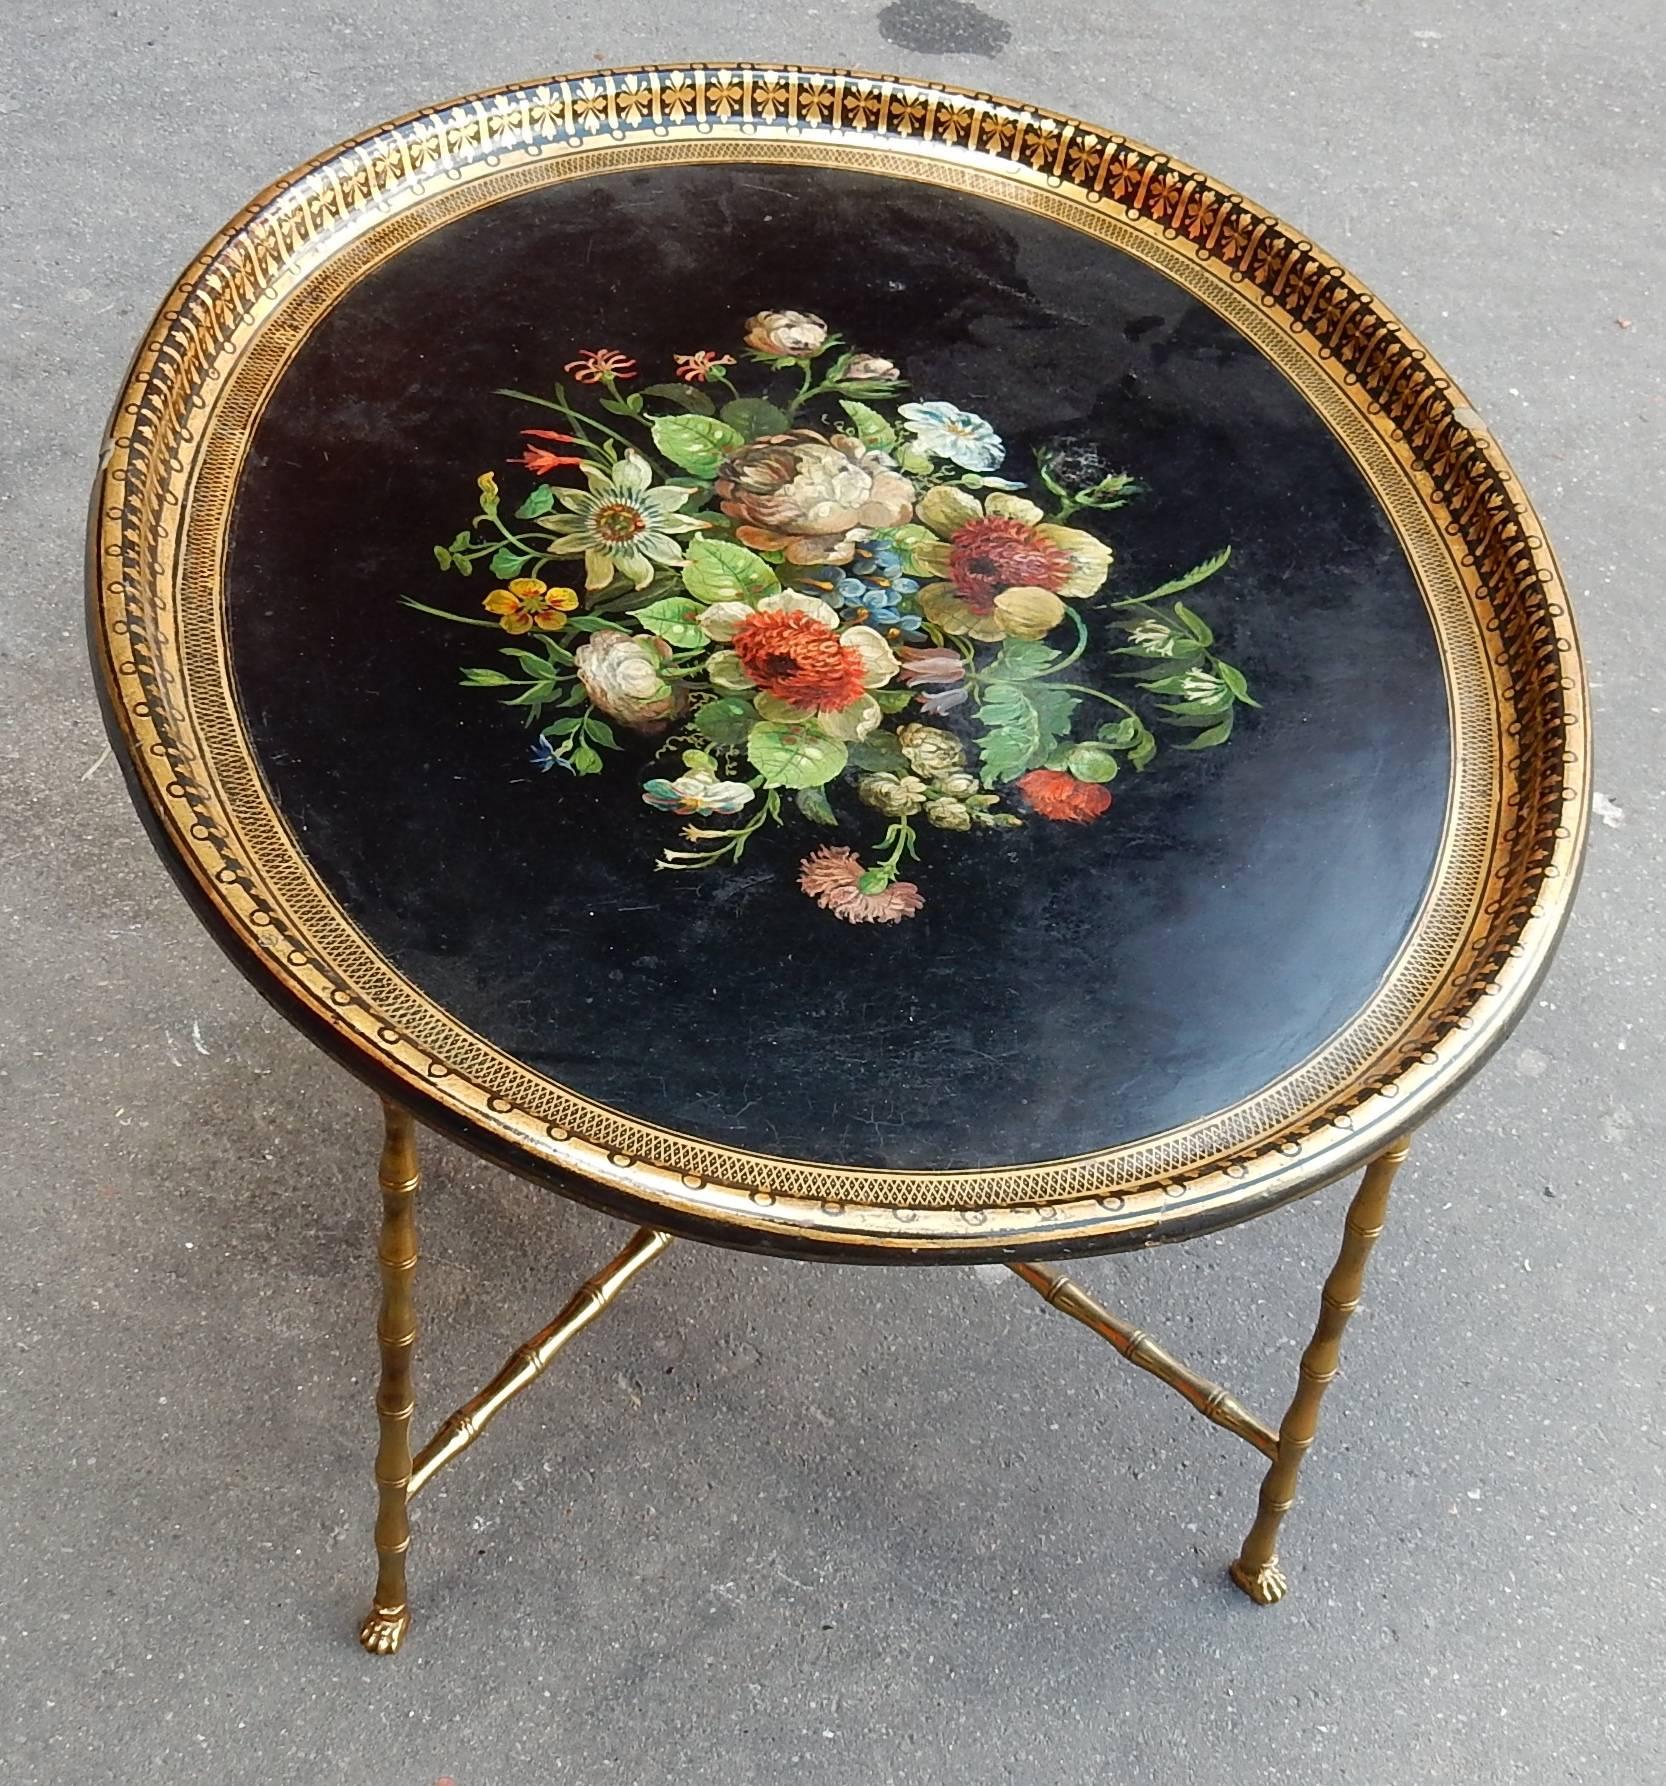 Coffee table in brass decoration bamboo of ovale form marrying a tray paper chewed Napoleon III lacquer of China has decoration has l yet, the low part is shown solidarity by a spacer, circa 1950-1970 good condition.